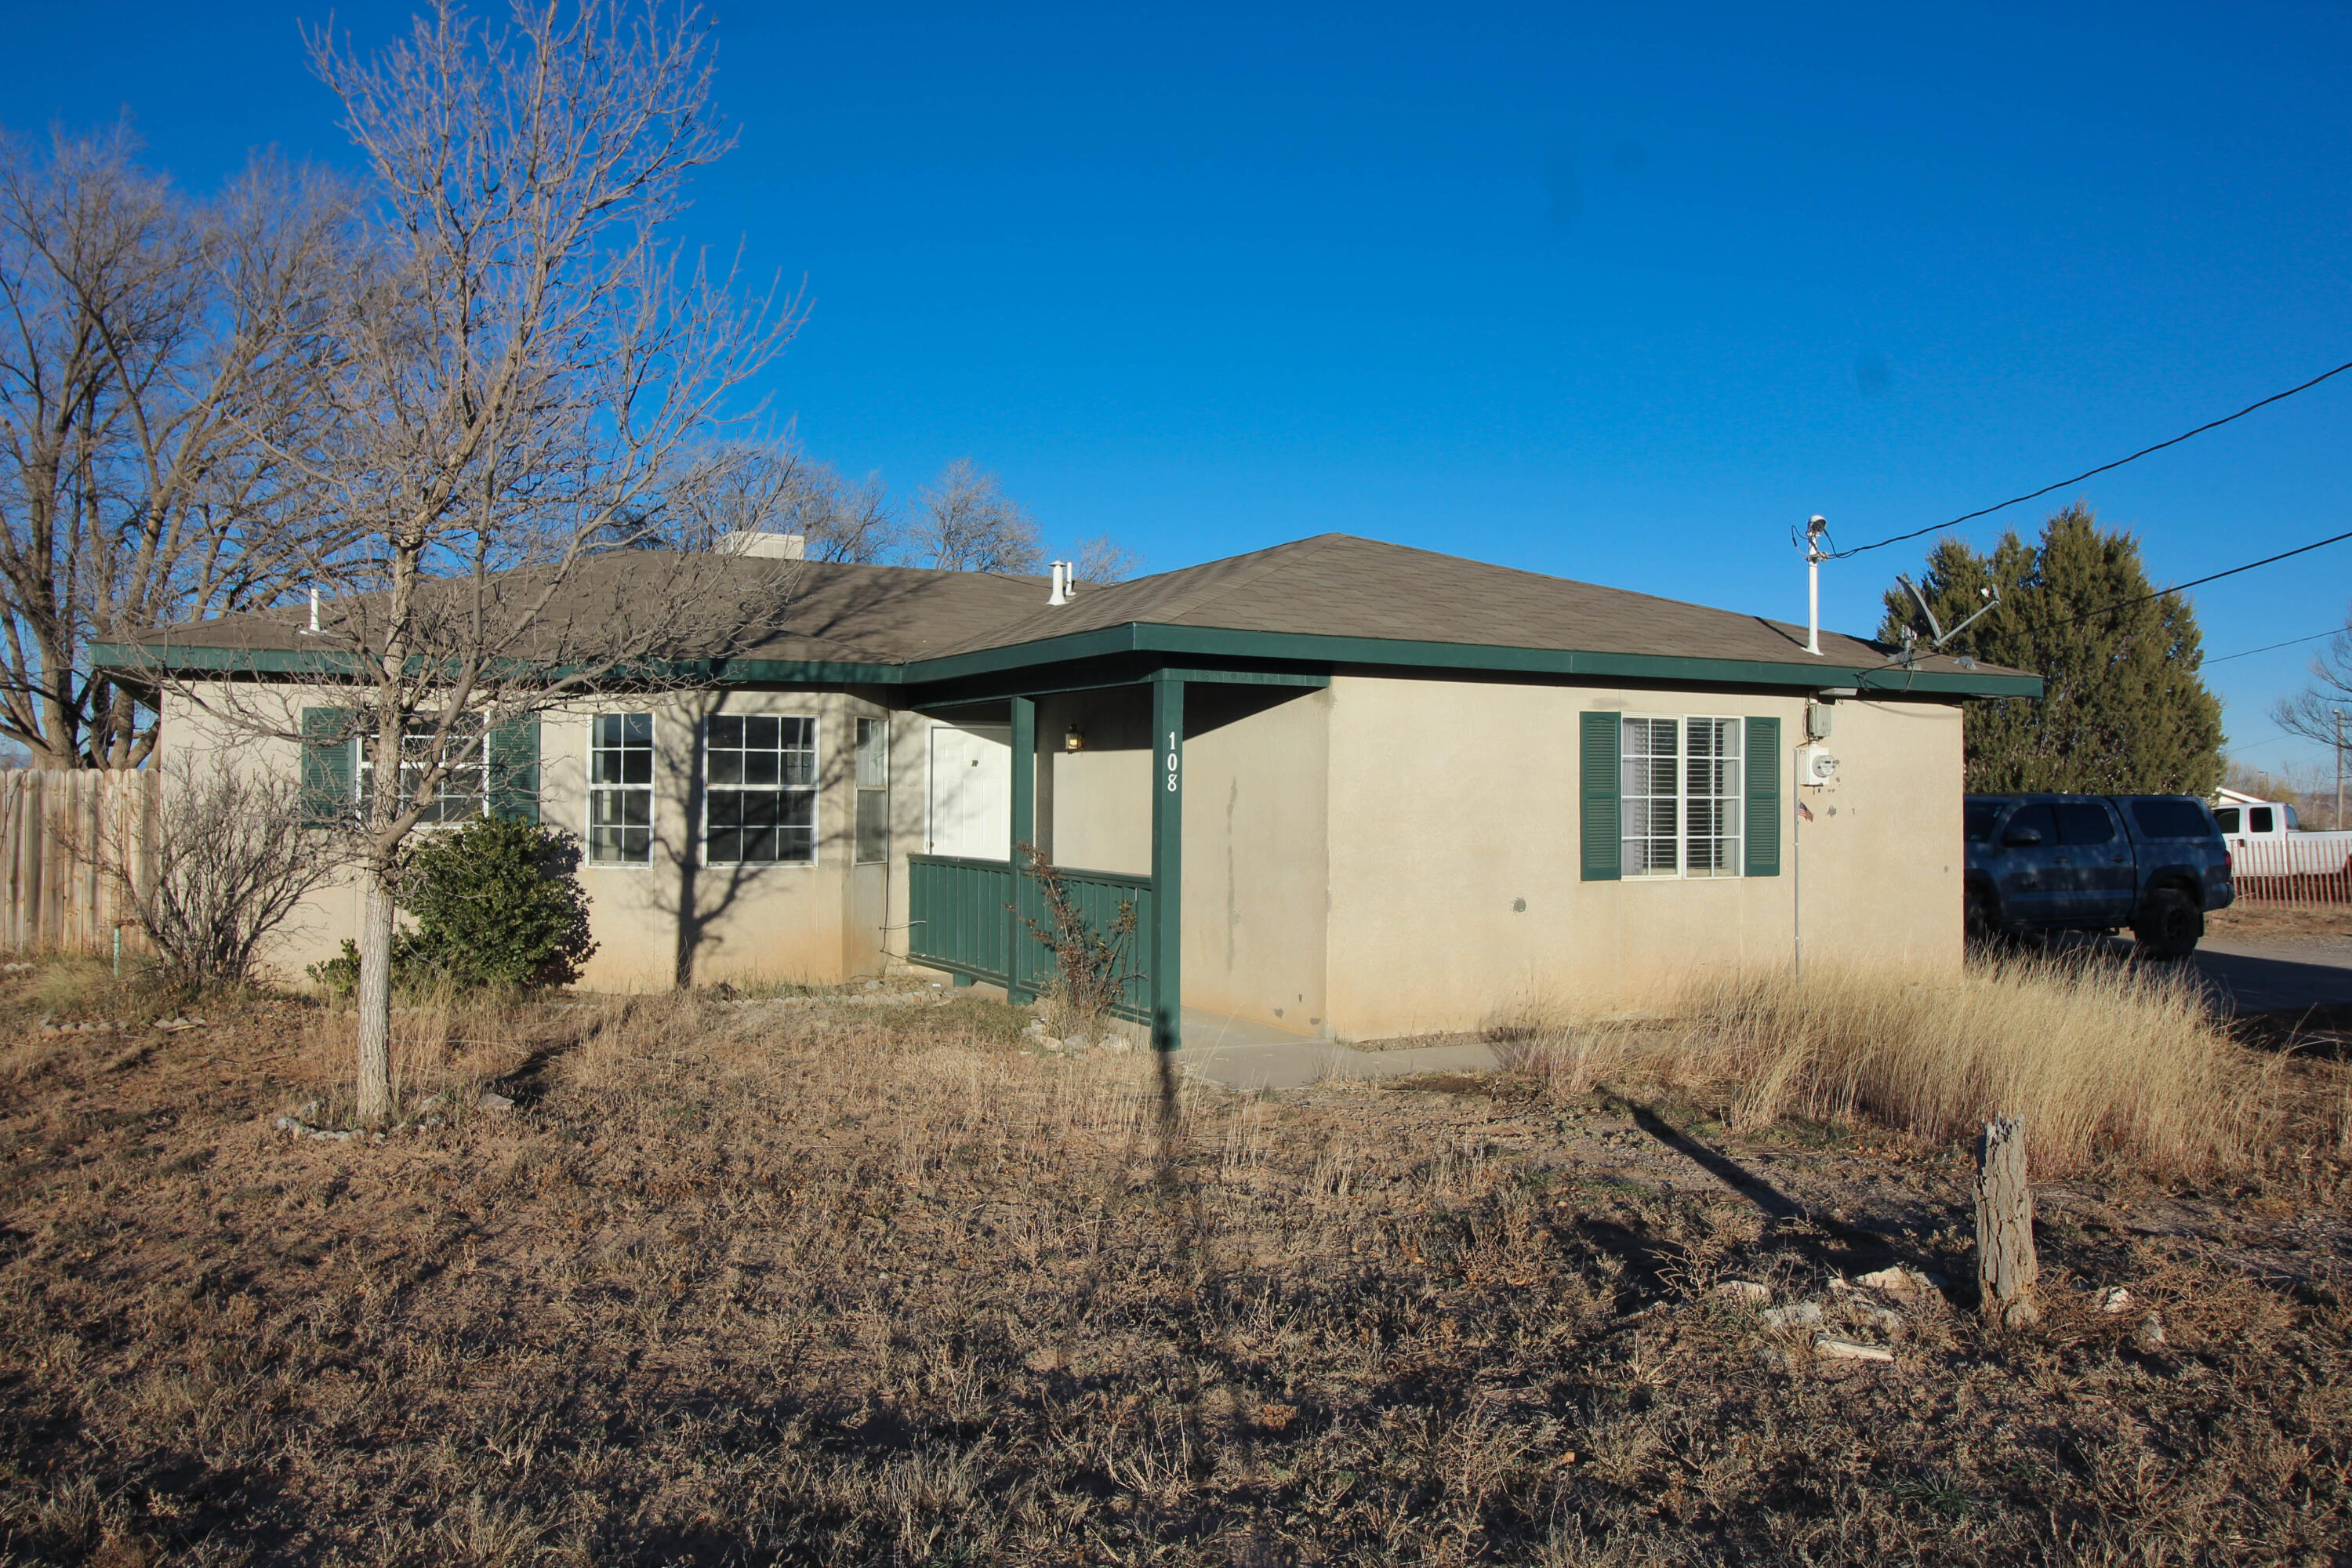 Great home in the heart of Edgewood!  3 bed, 2 bath with a nice and open floorplan.  Fenced backyard with large trees and great views of South Mountain.  2 car attached garage.  Natural gas and community water system.  Just minutes to shopping and restaurants.